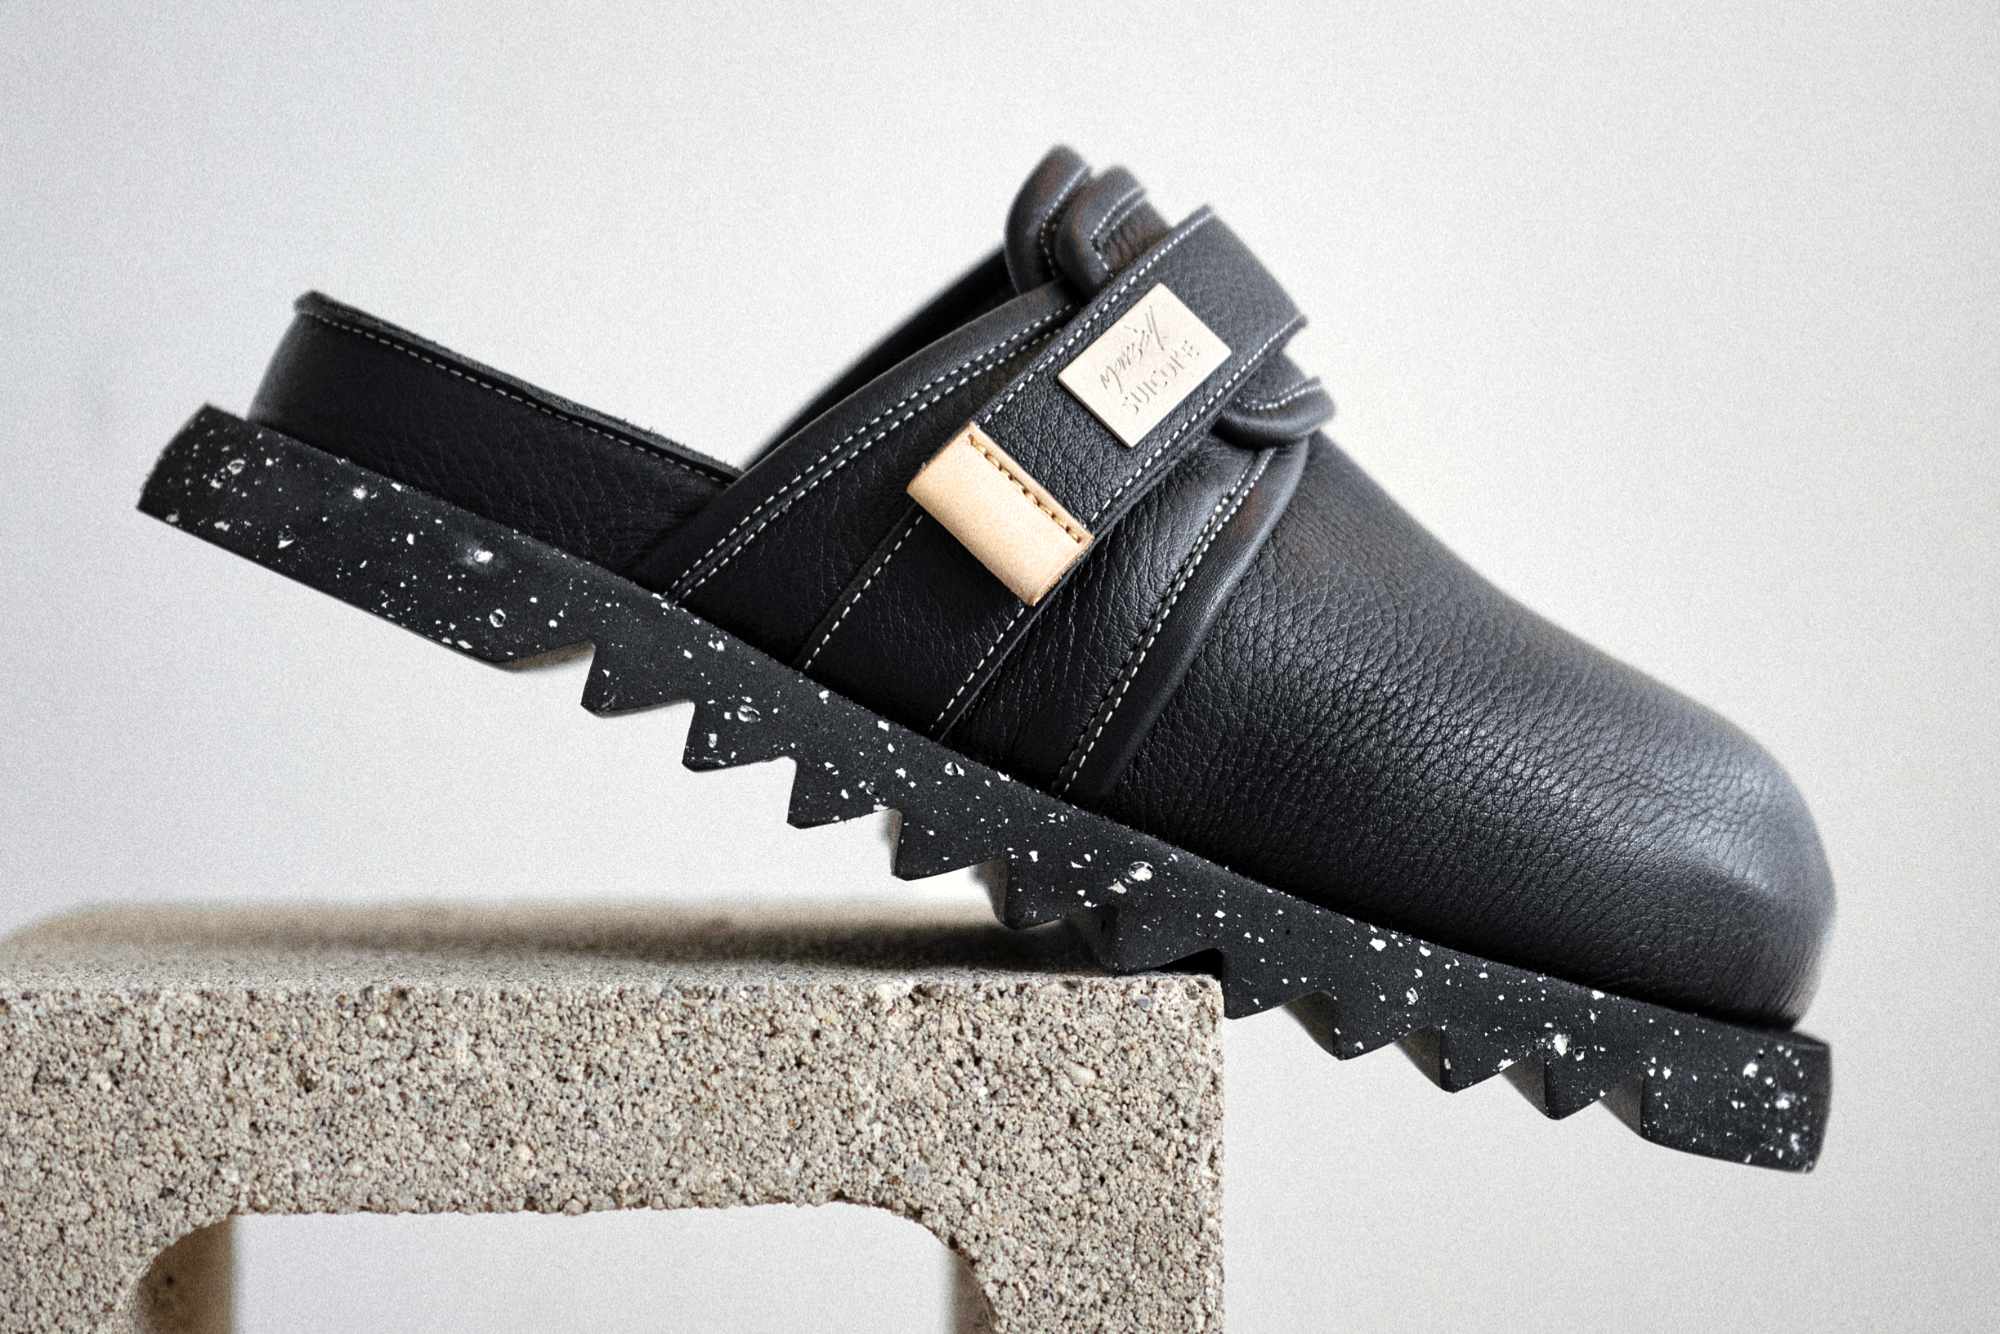 Suicoke & Marsell's $850 leather clog collab